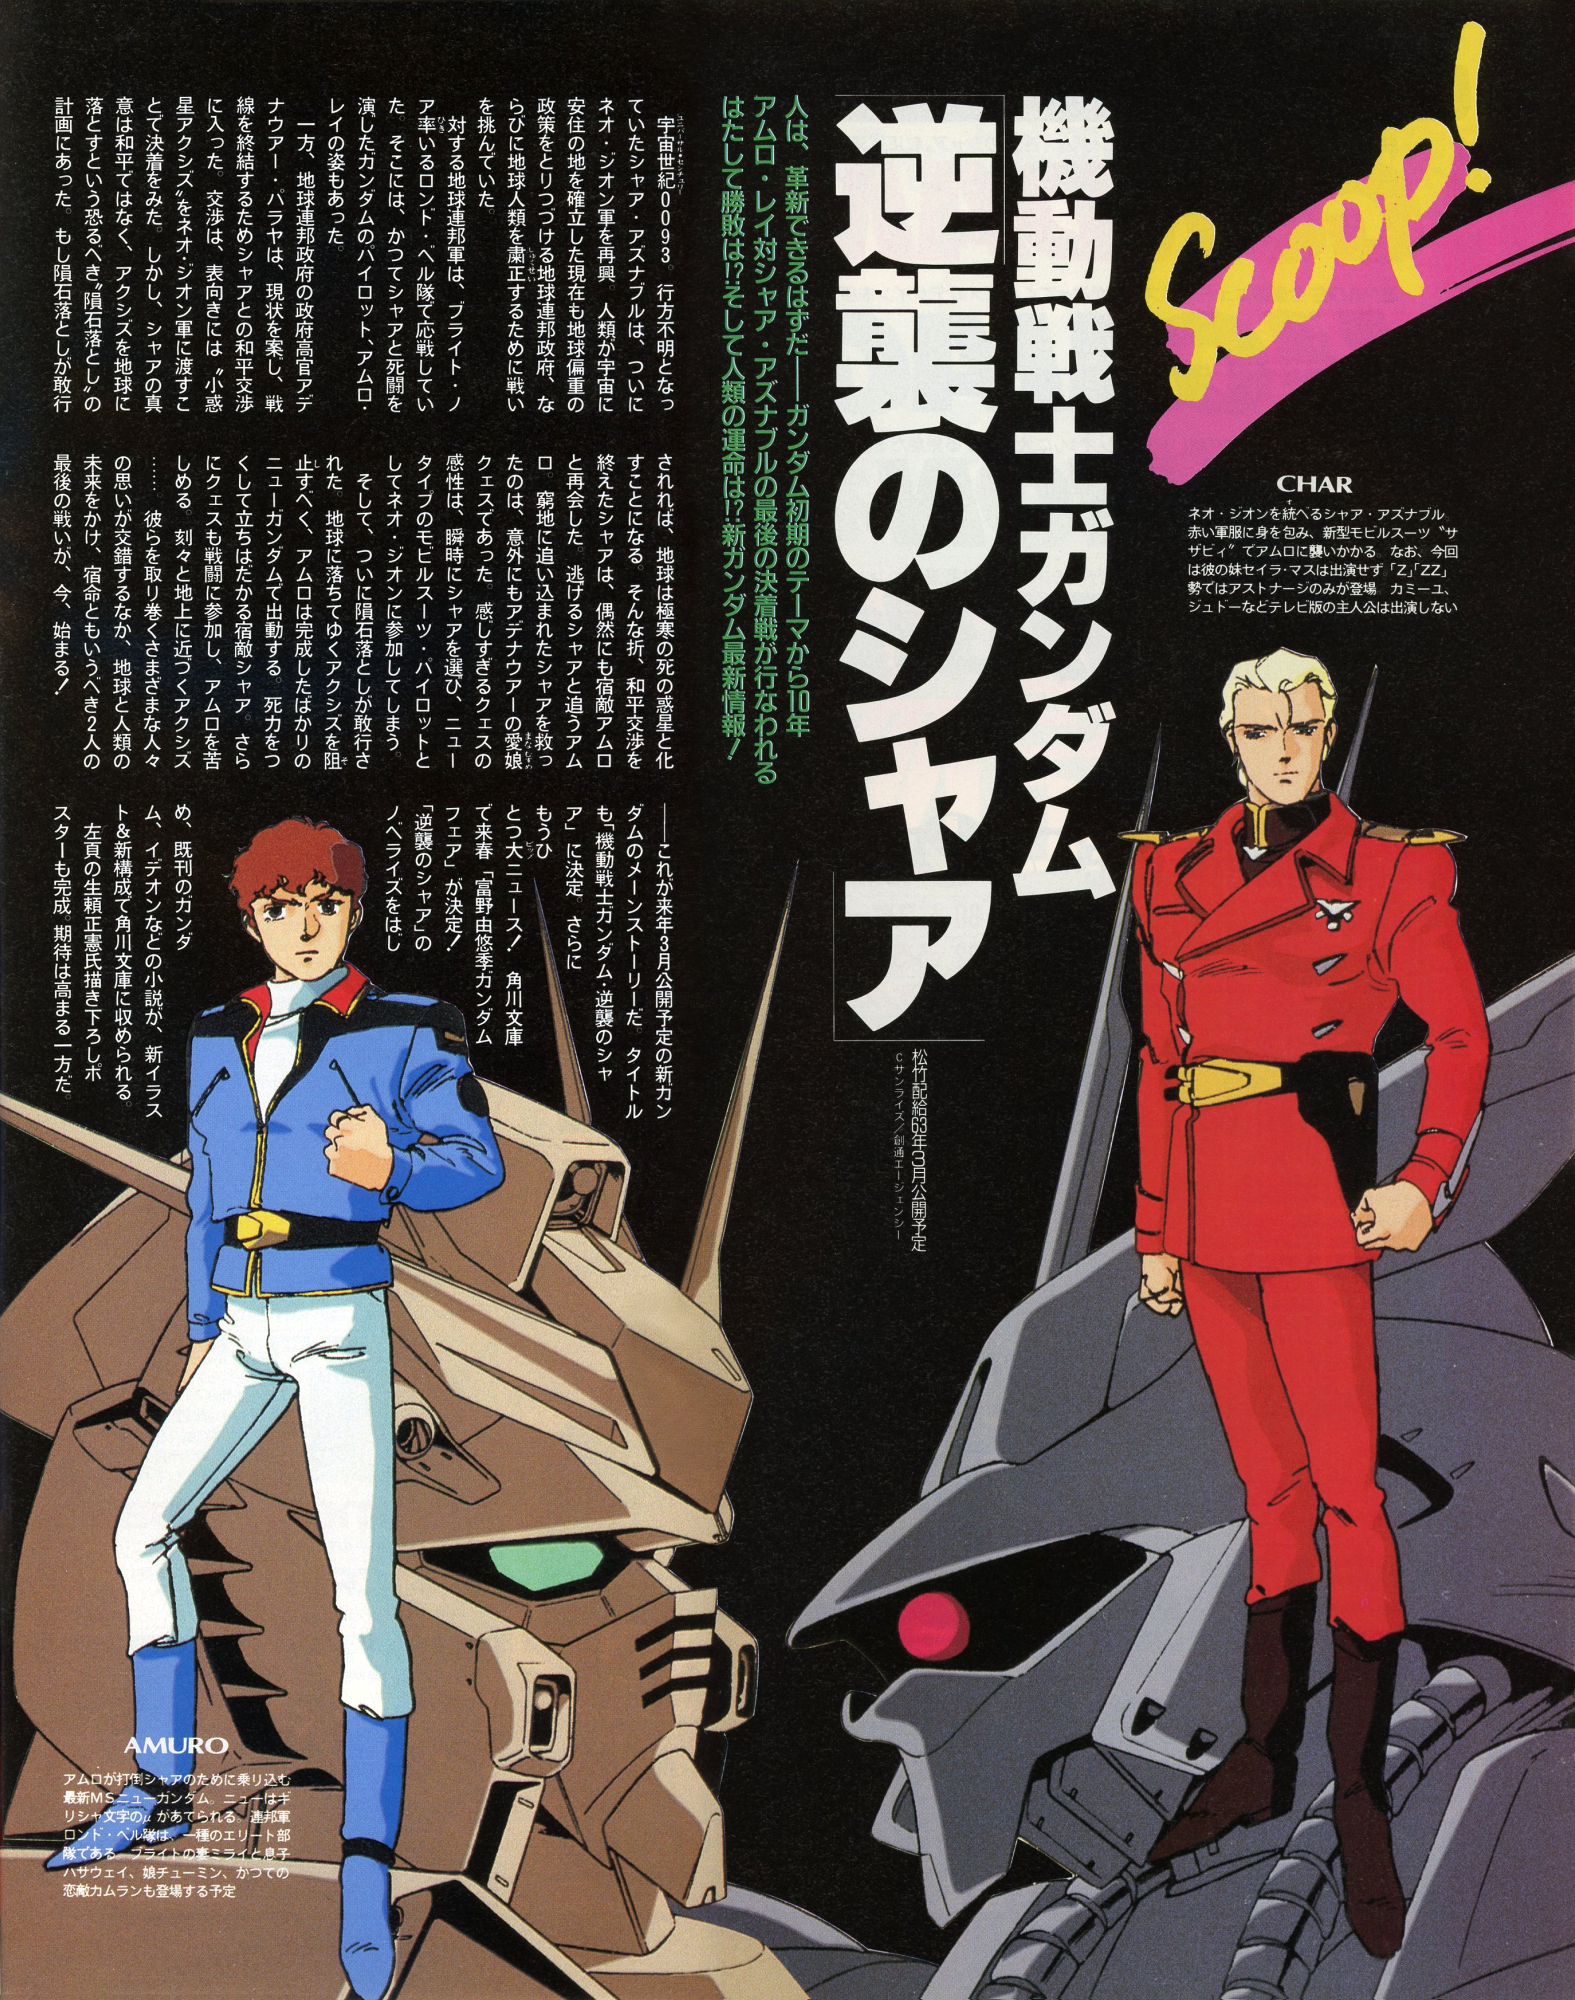 Road to Char’s Counterattack – 09/1987 (Animedia & Newtype)